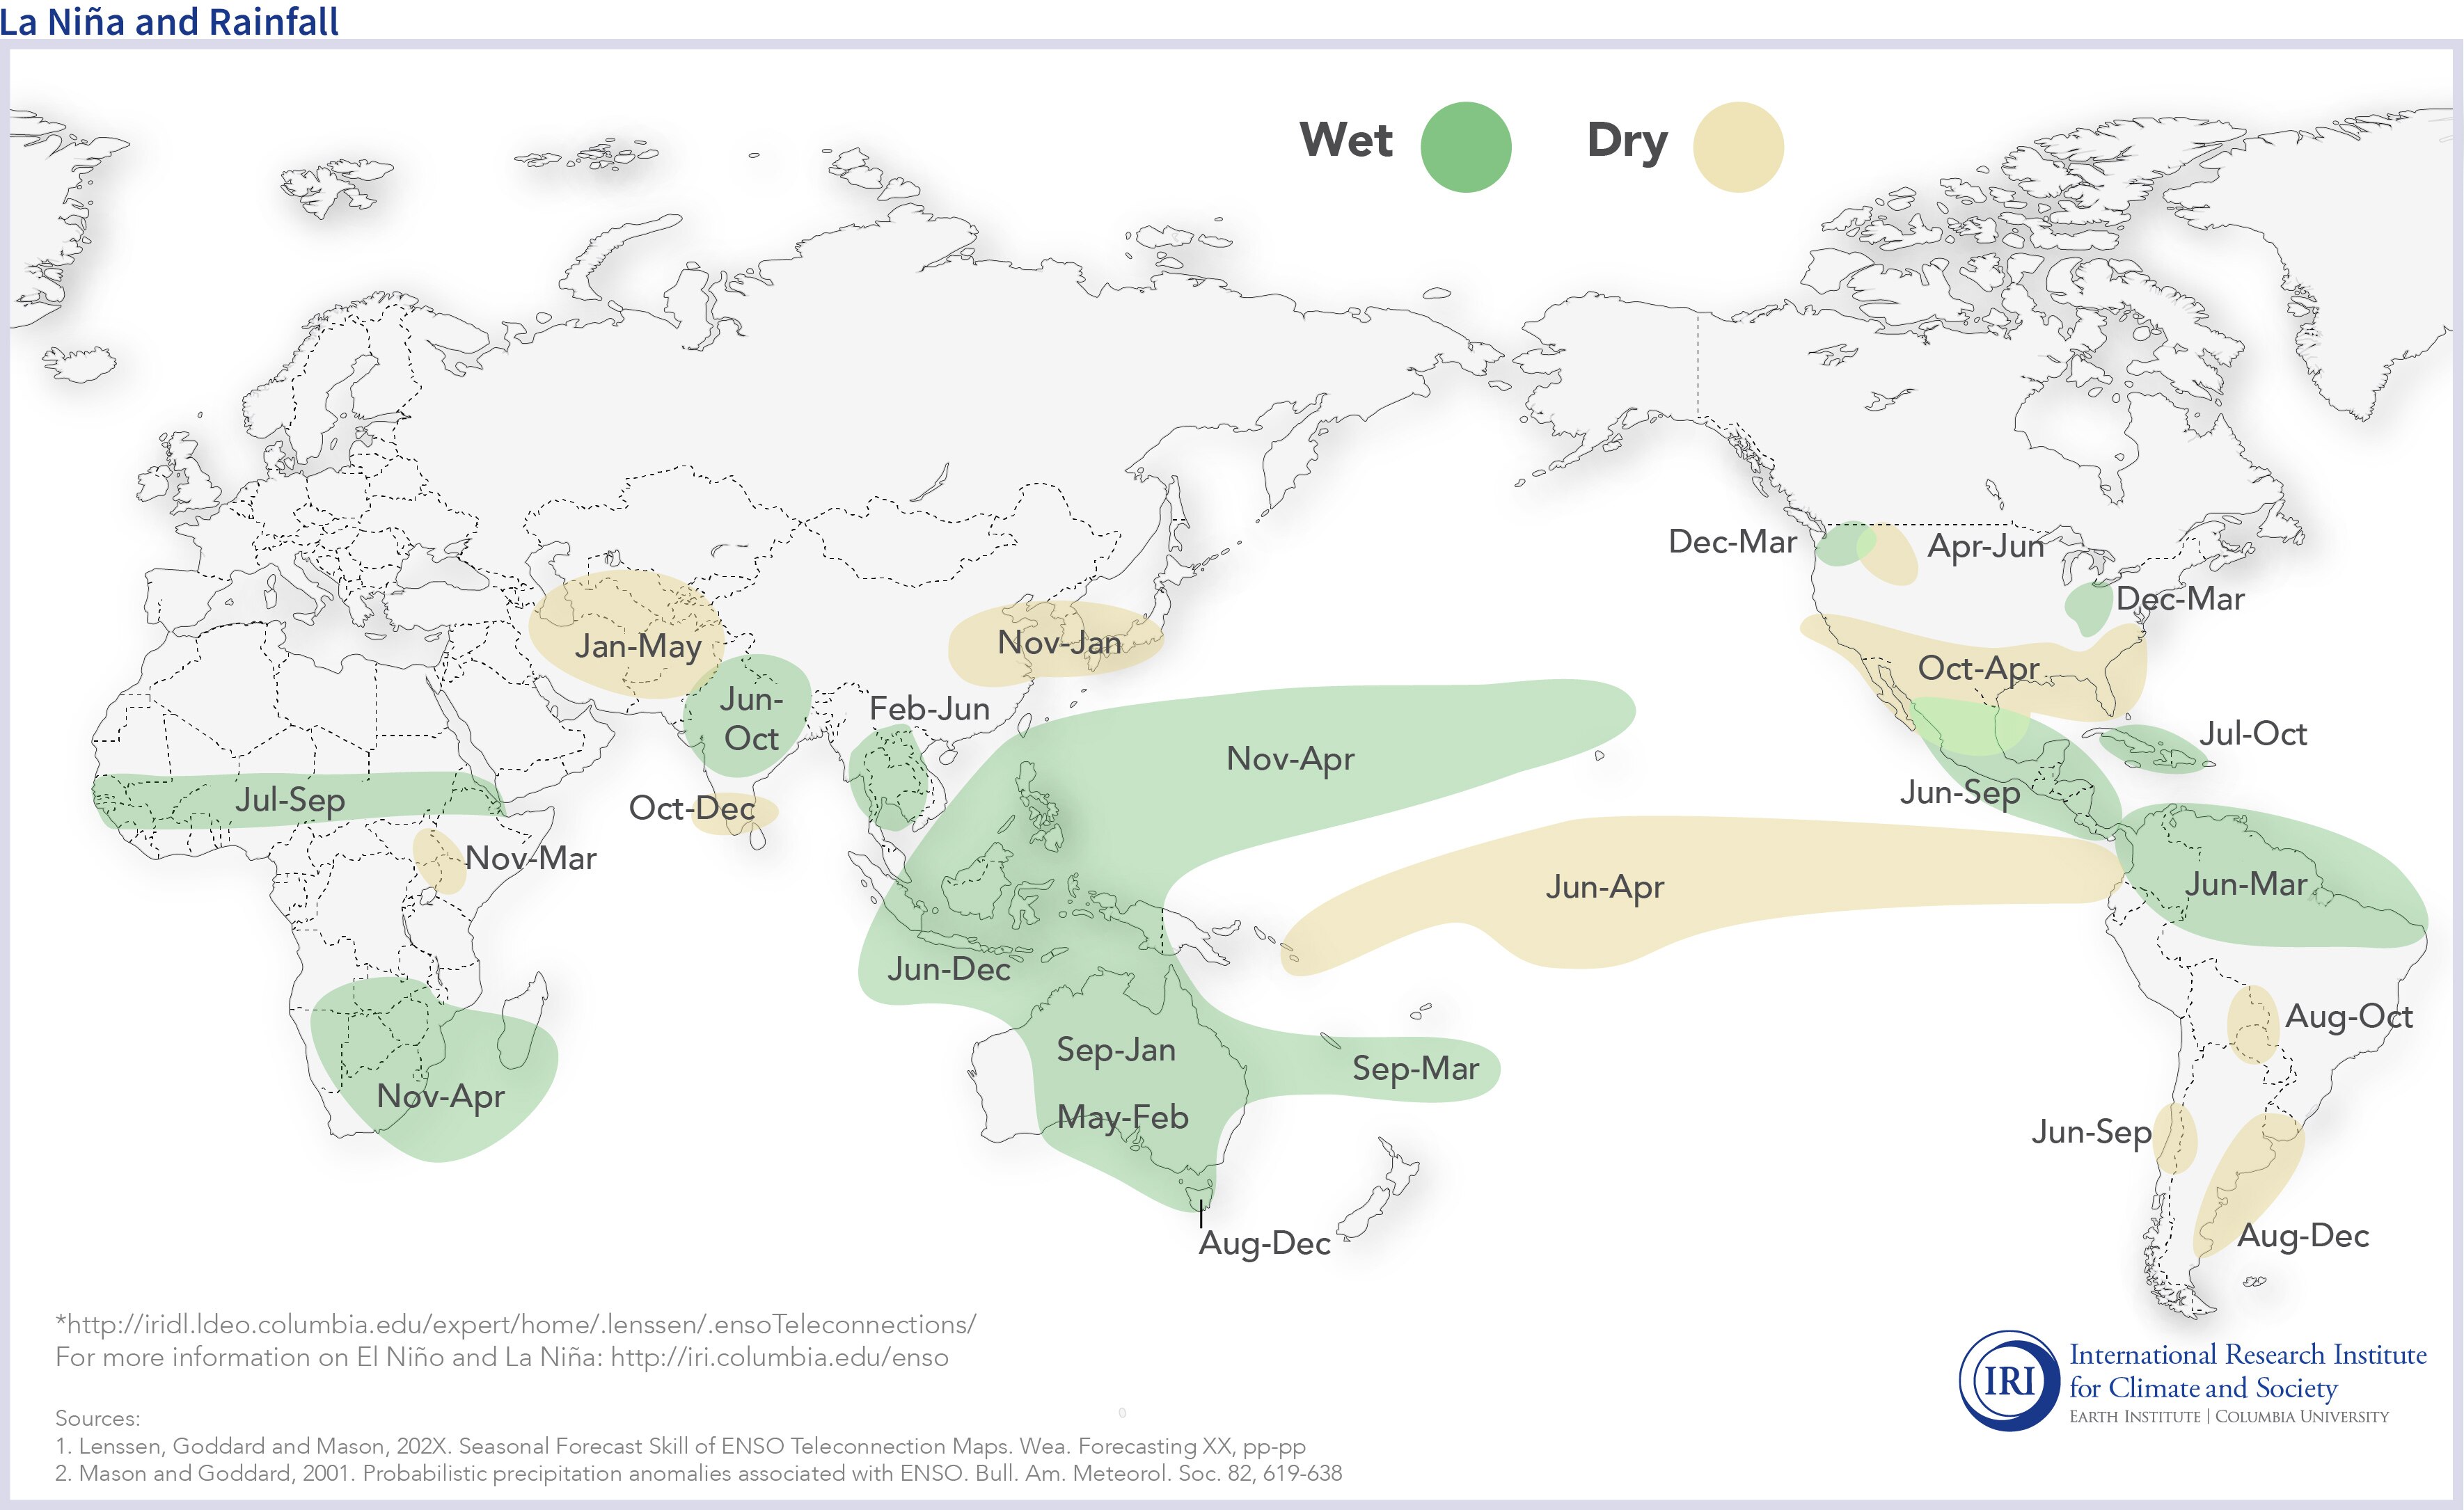 Map showing where La Nina encourages wetter and drier conditions around the world.